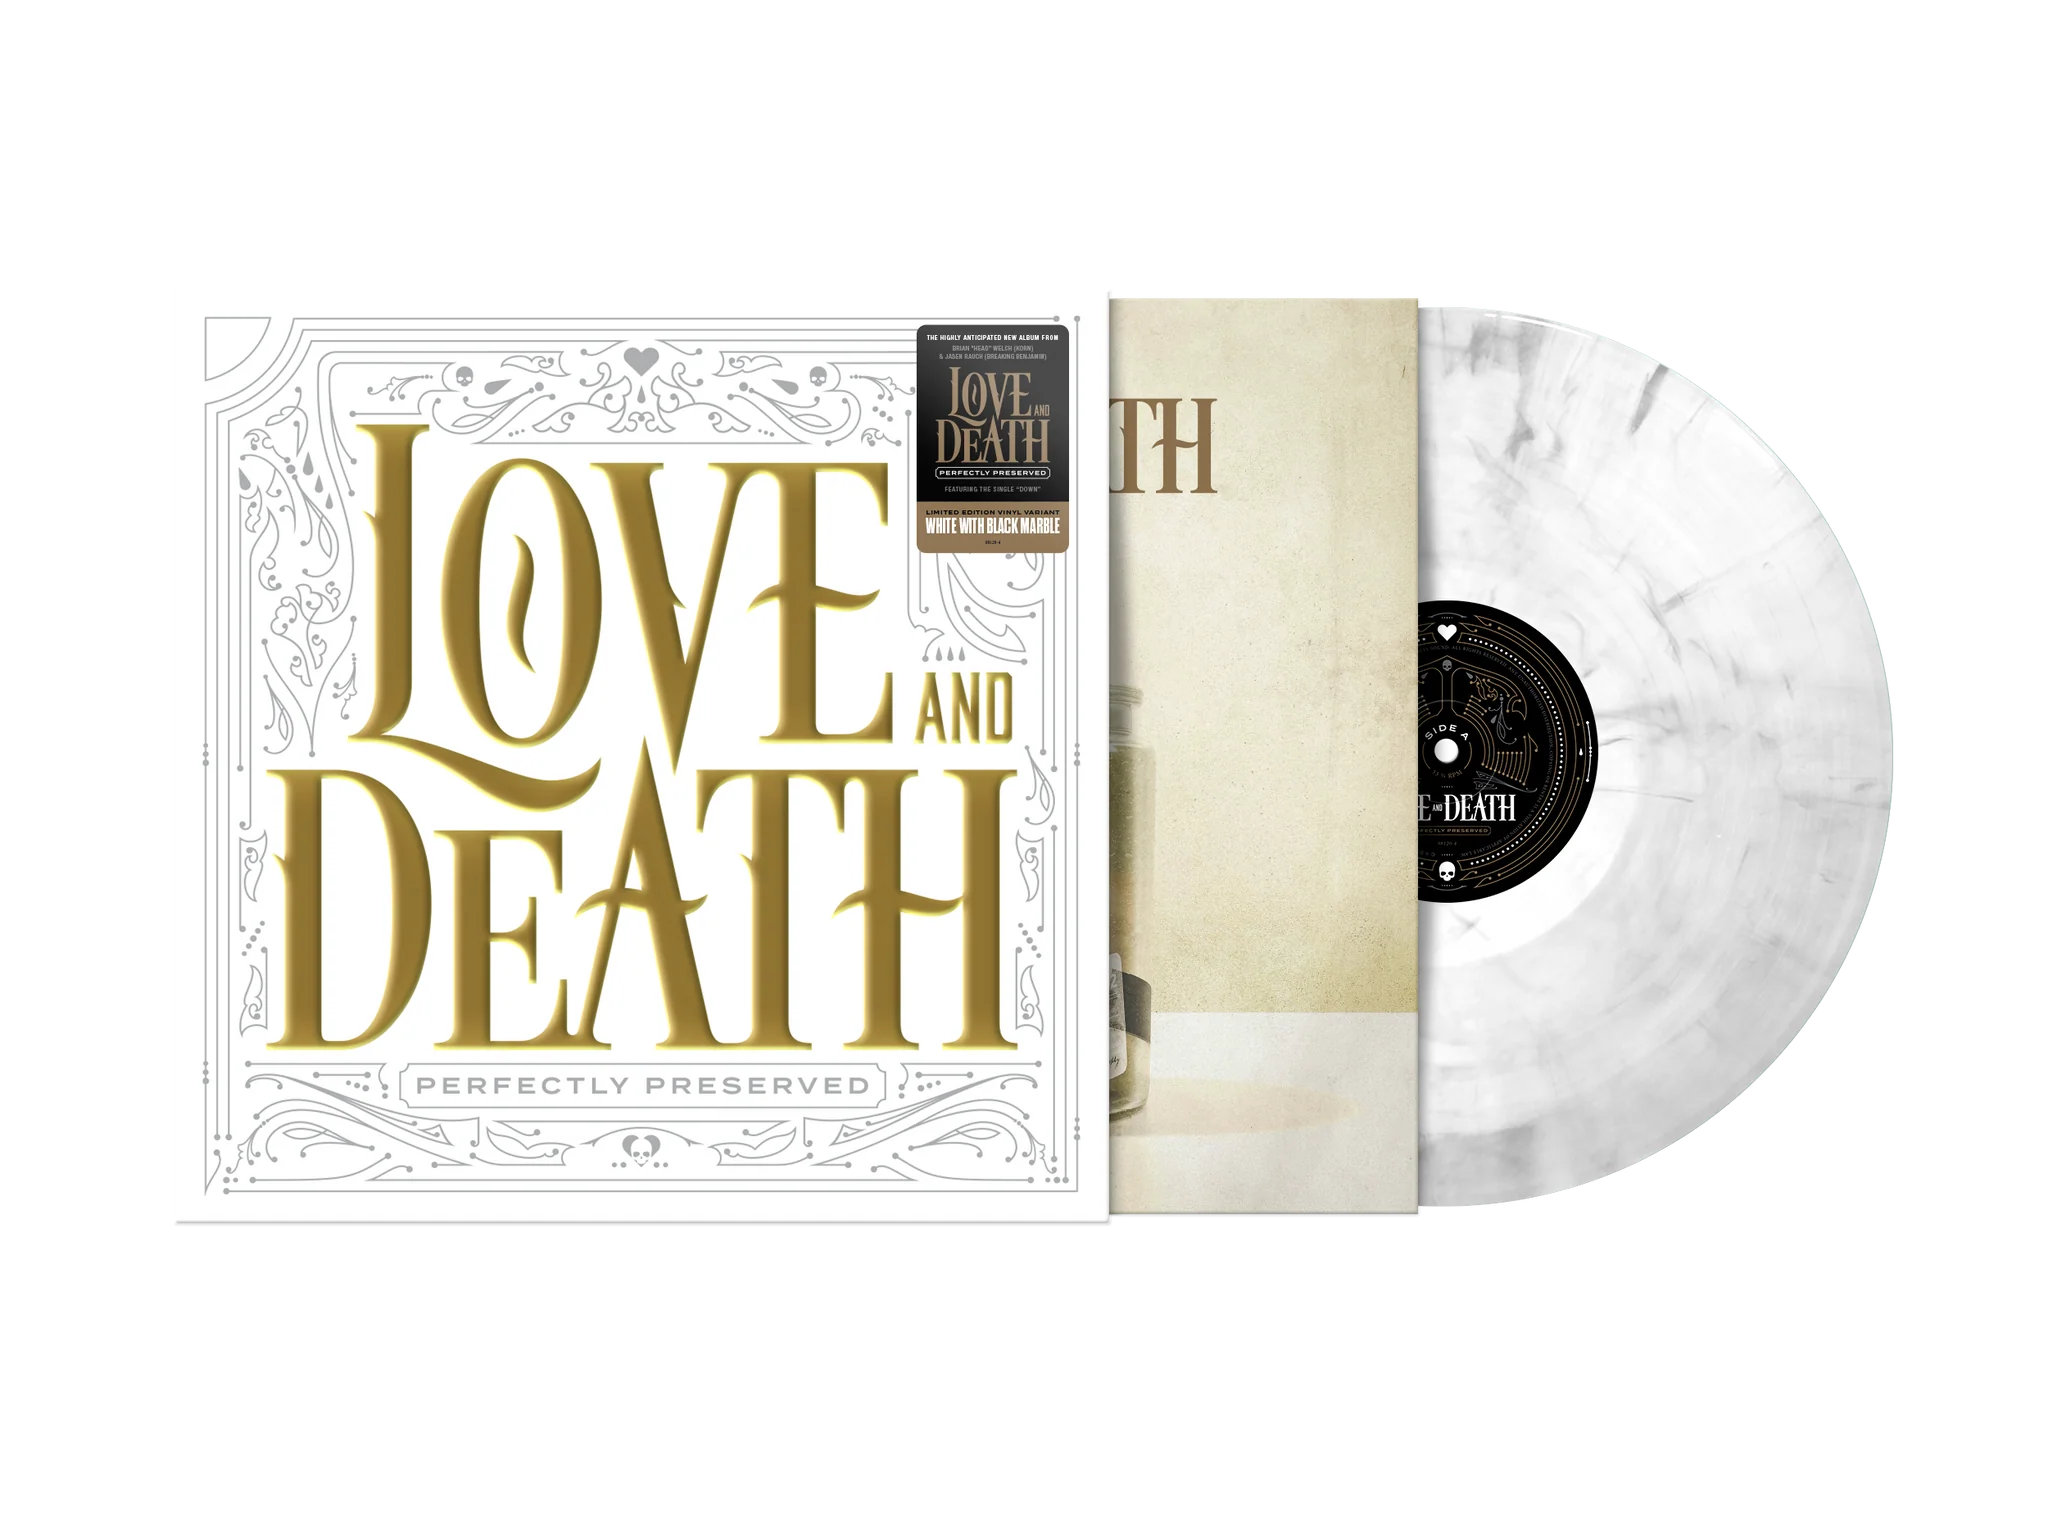 Love and Death - Perfectly Preserved (Ltd. Ed. 180G White w/ Black Marble Vinyl) - Blind Tiger Record Club